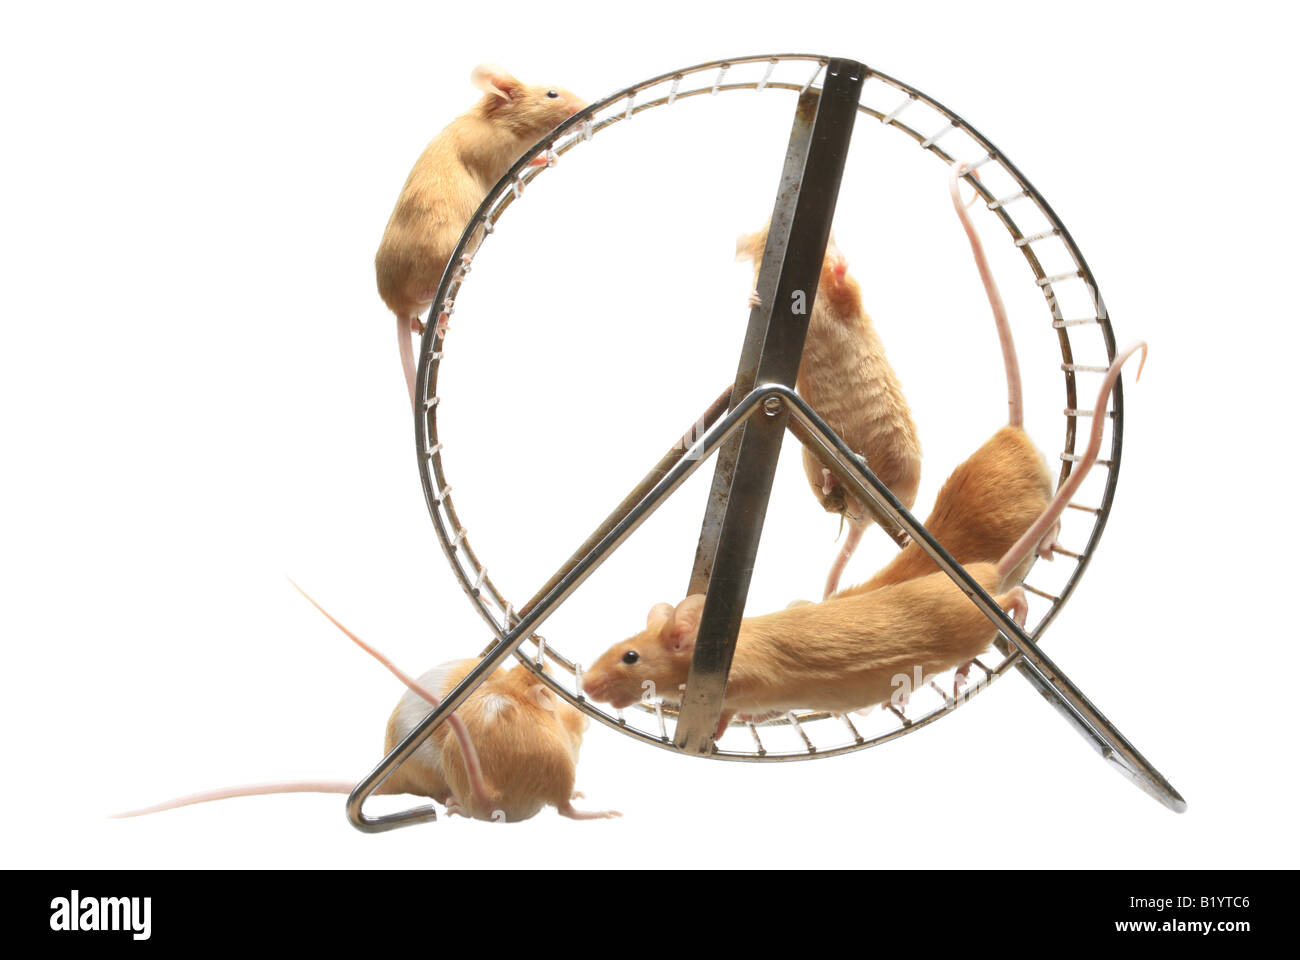 house mouse Mus musculus coloured mouses in hamster wheel Stock Photo